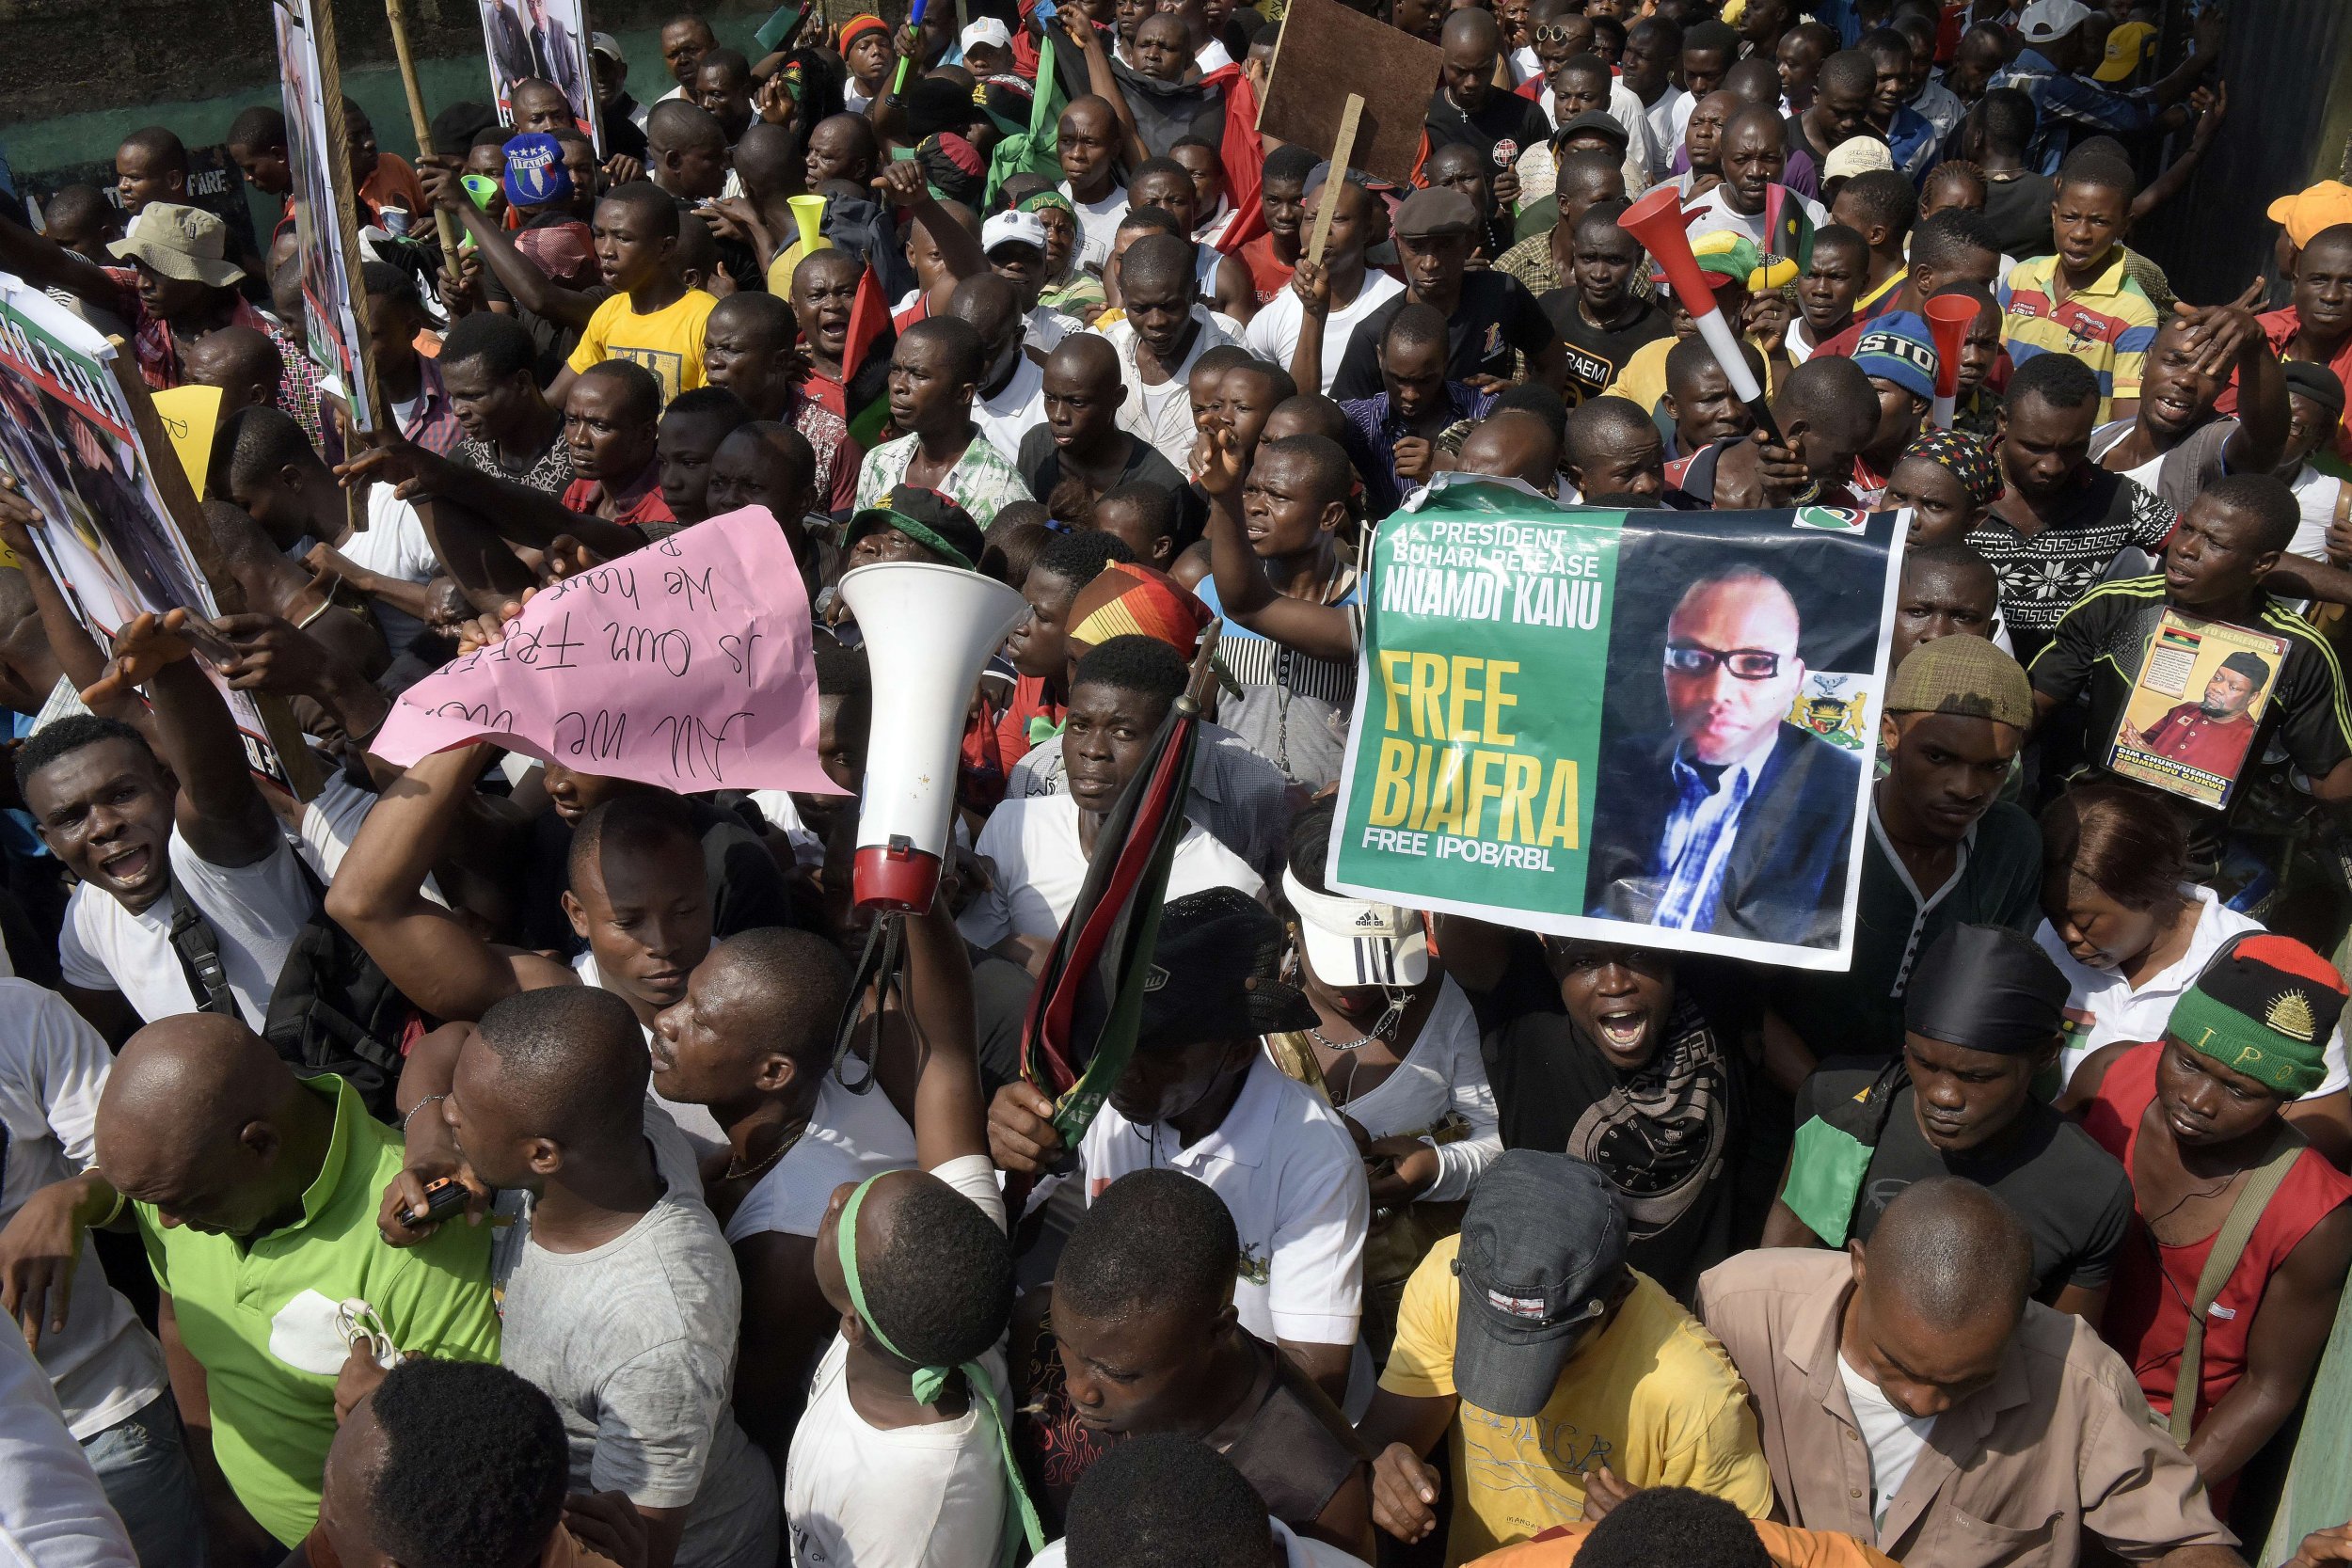 Pro-Biafra supporters carry a poster of Nnamdi Kanu at a protest in Aba, Nigeria.